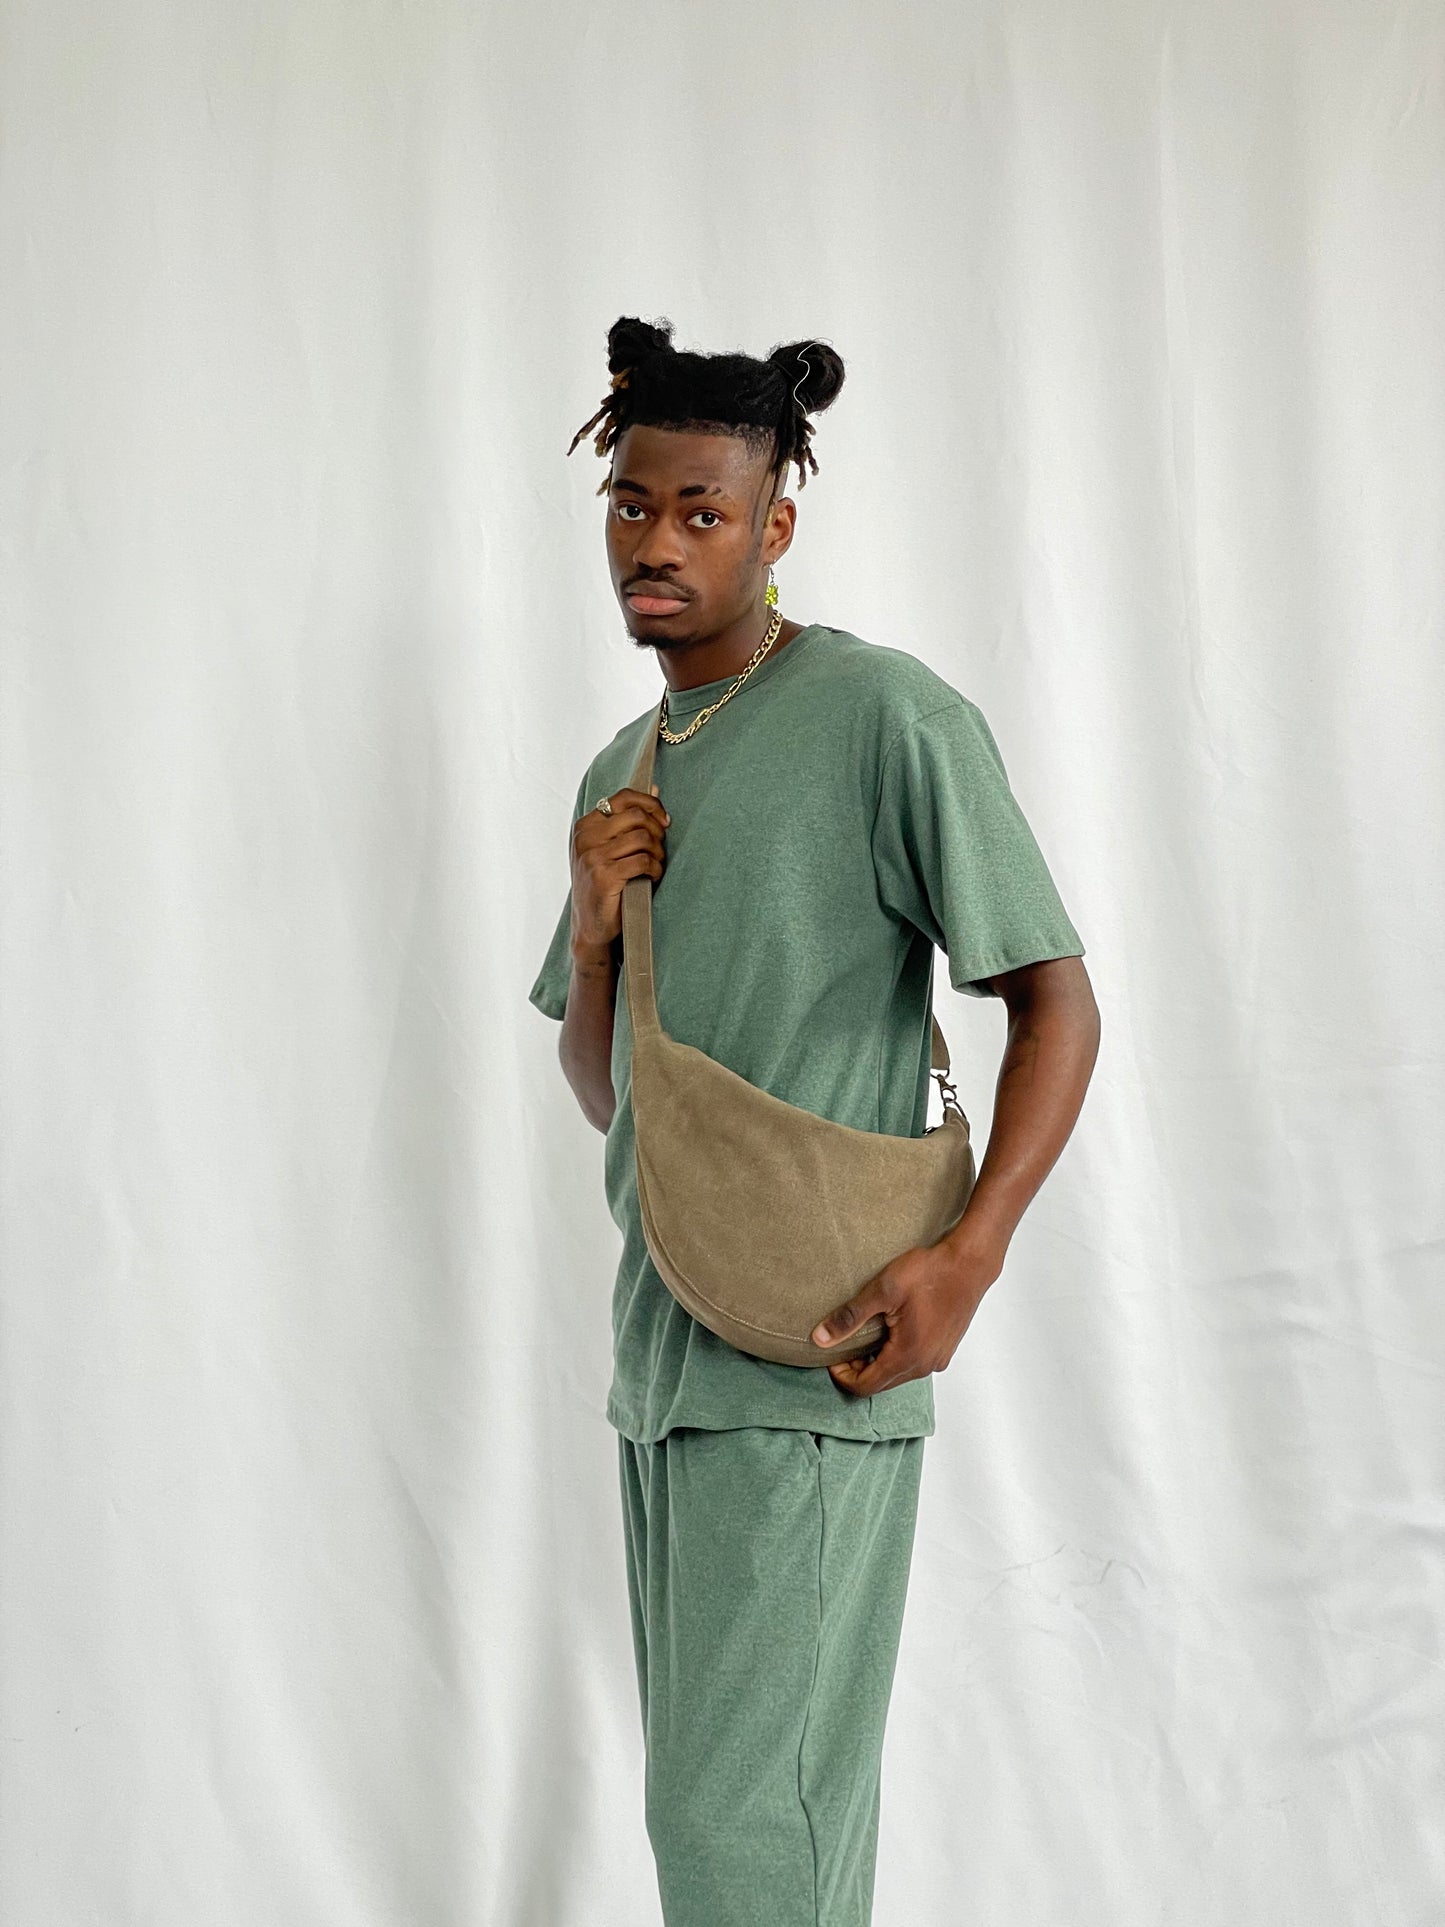 Model wears brown sling bag with green t-shirt and pants against a white backdrop